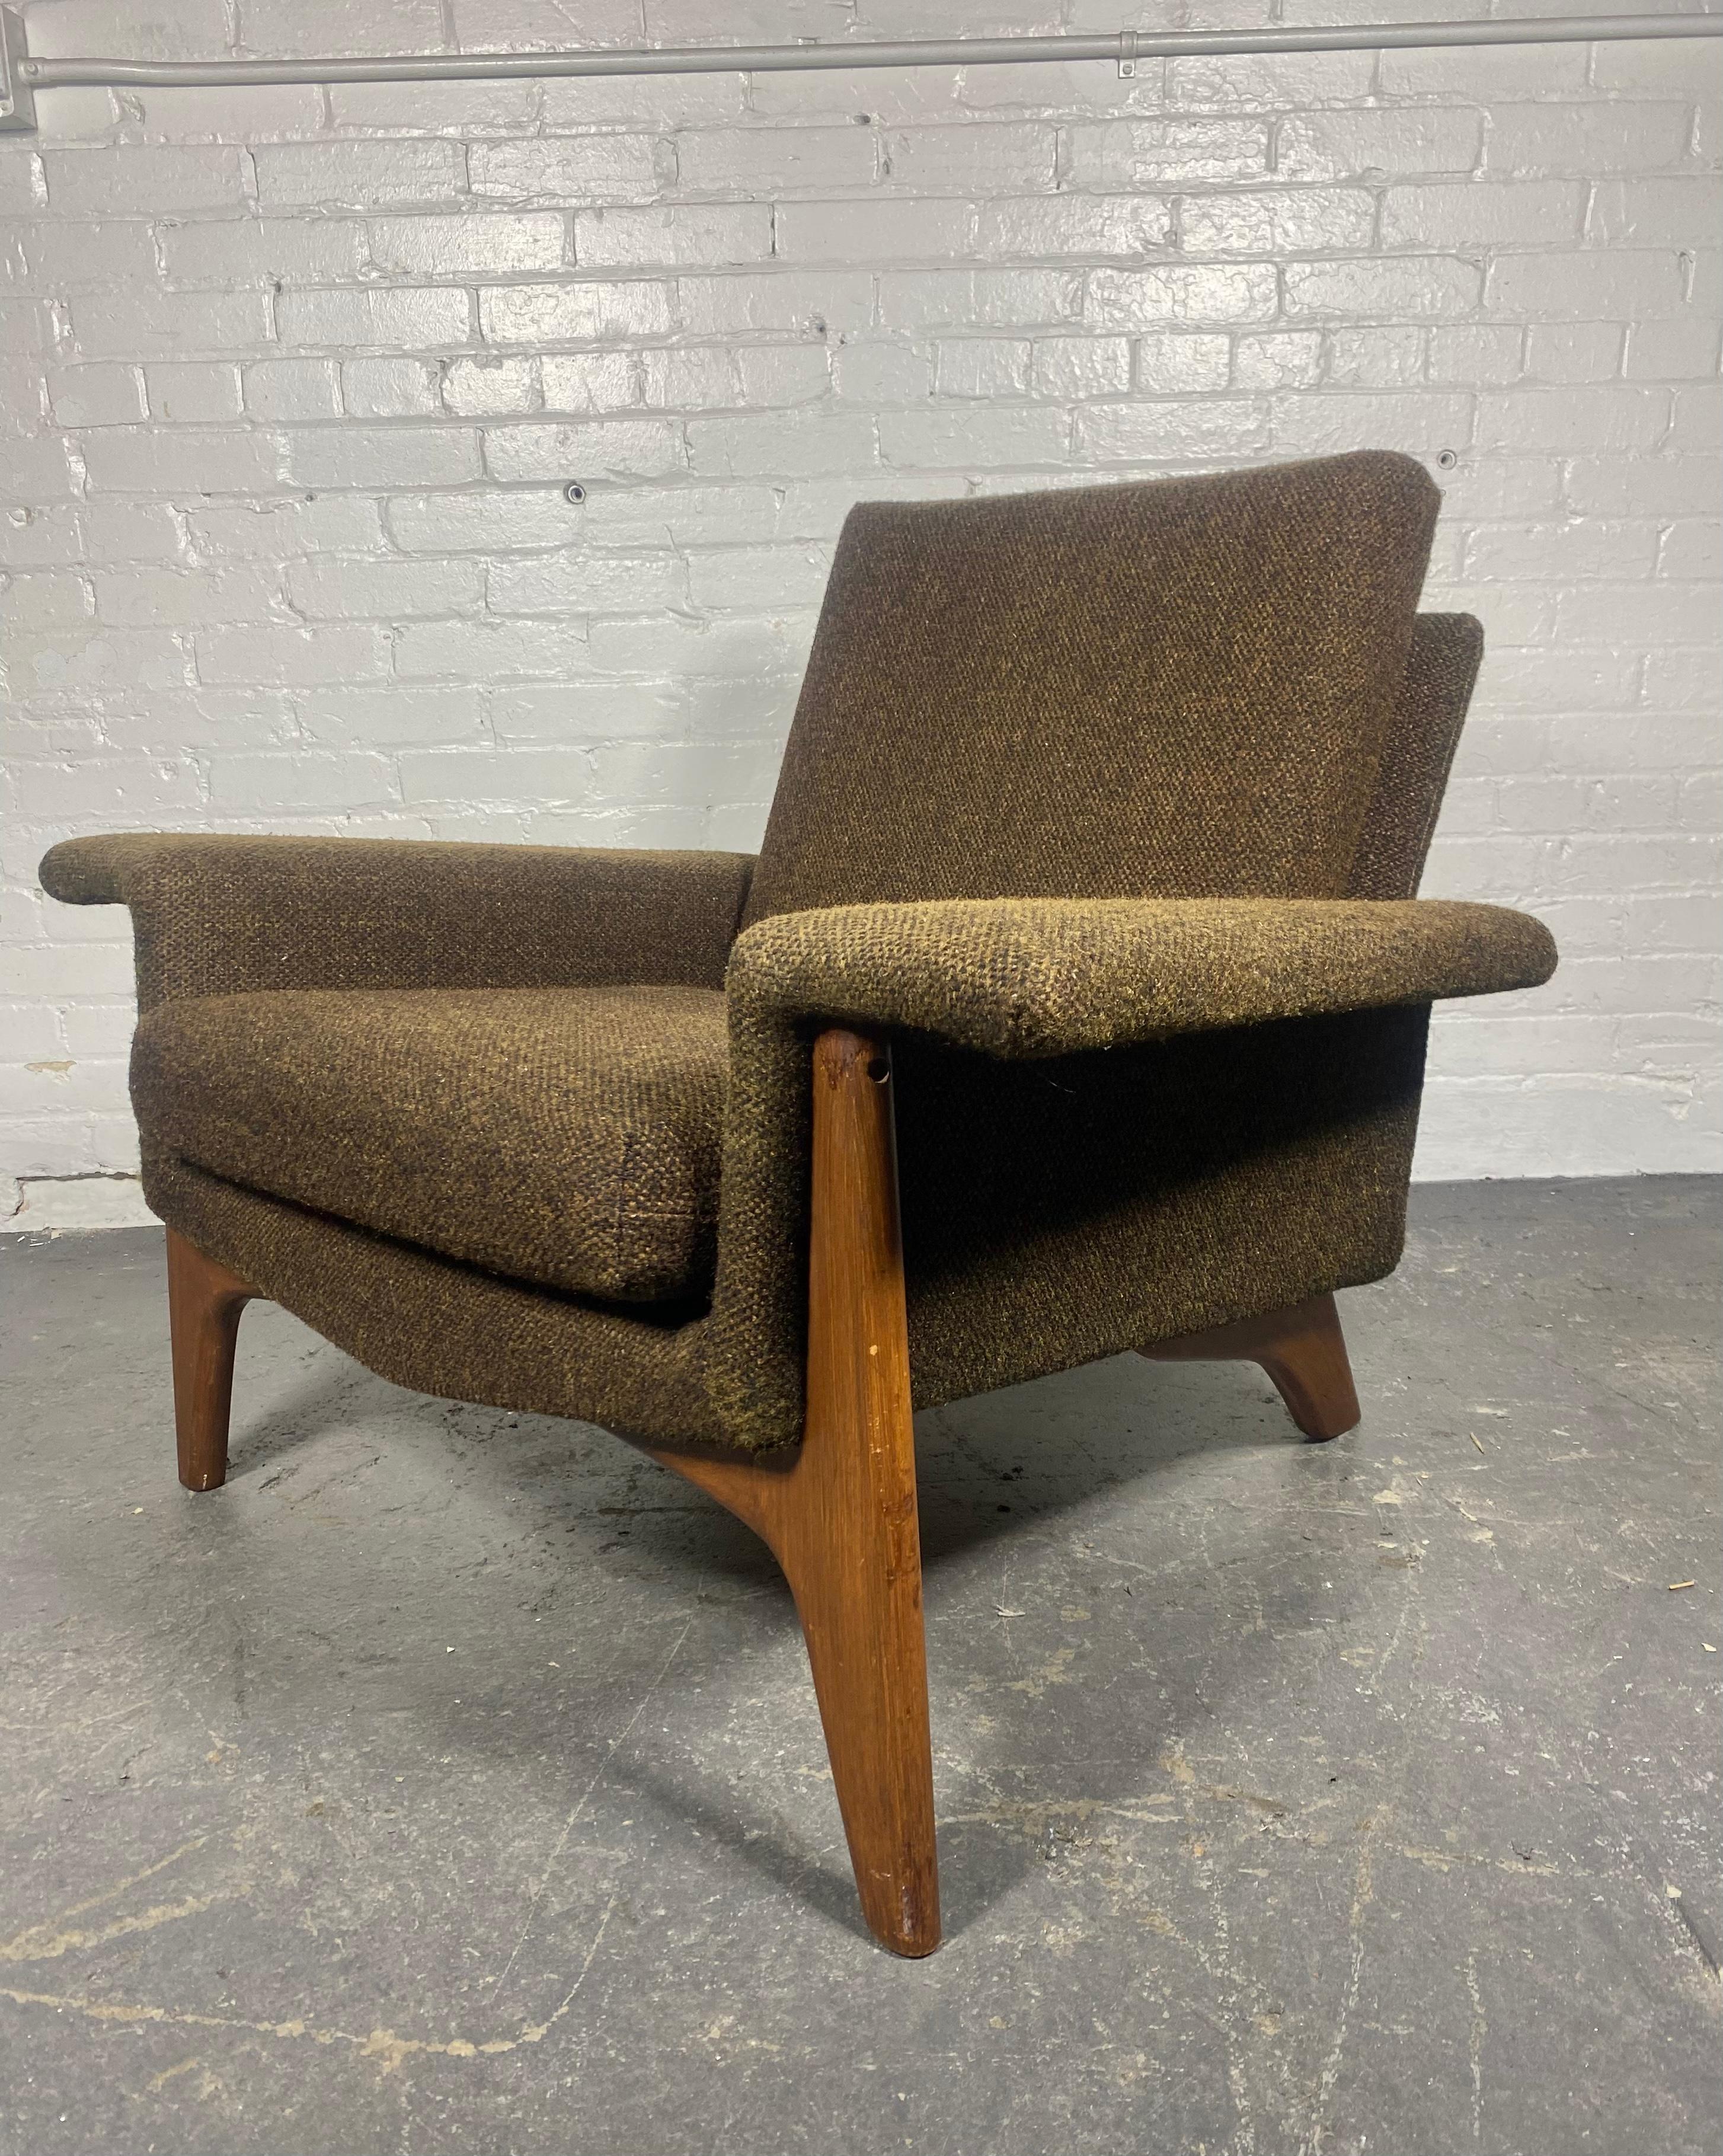 Mid-20th Century Dramatic Modernist Lounge Chair by Adrian Pearsall.Sculptural Walnut Base.